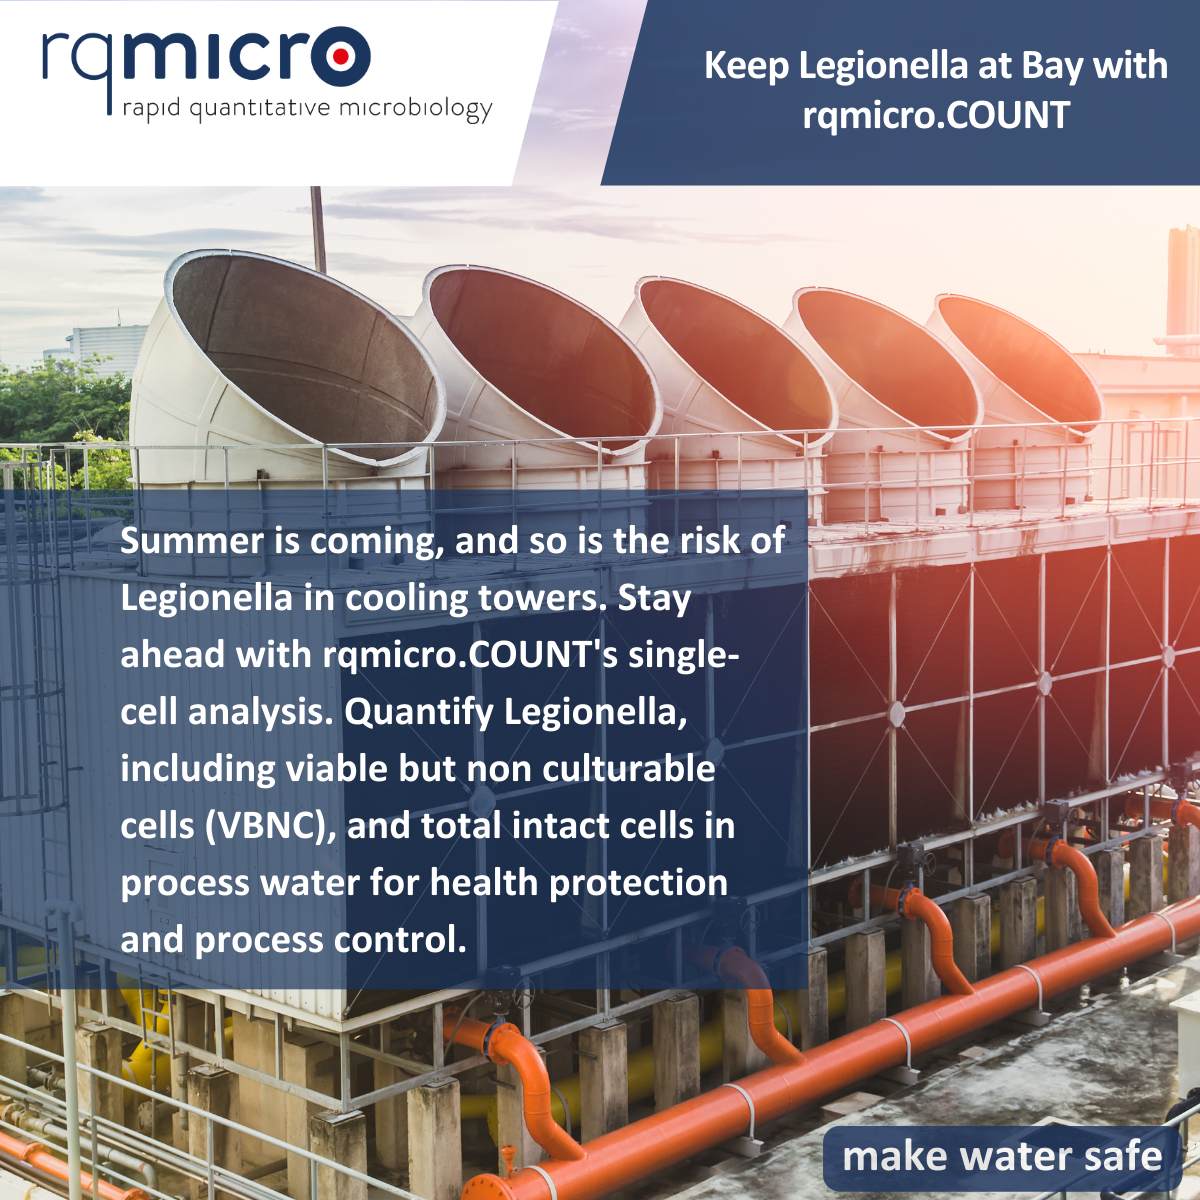 Keep Legionella at Bay with rqmicro.COUNT